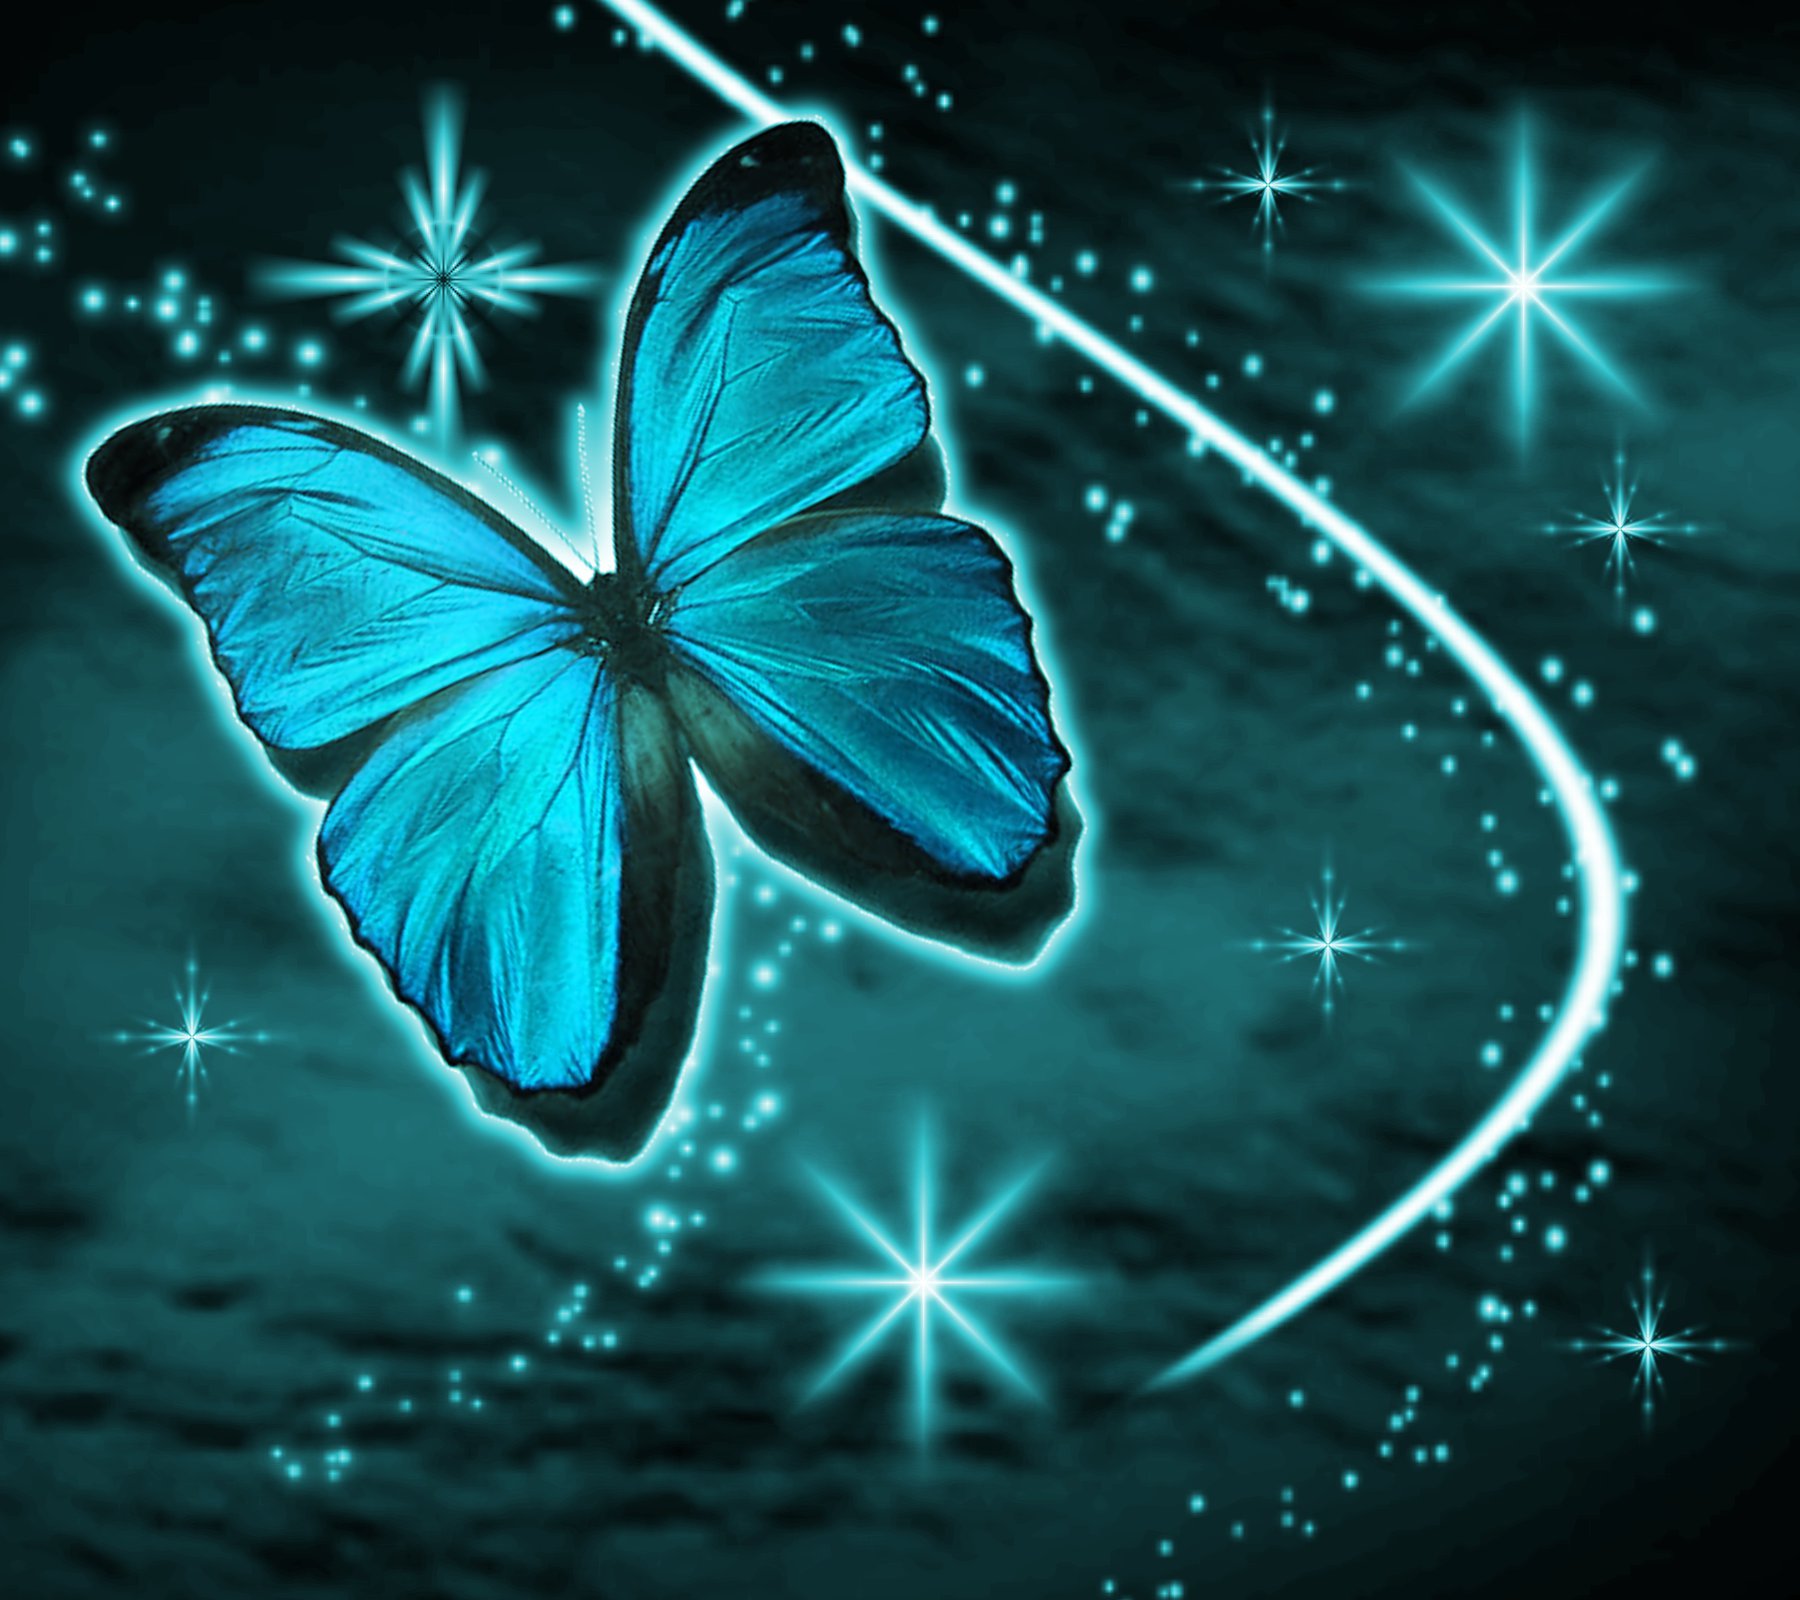 Aqua Butterfly With Stars Background 1800x1600 Background Image